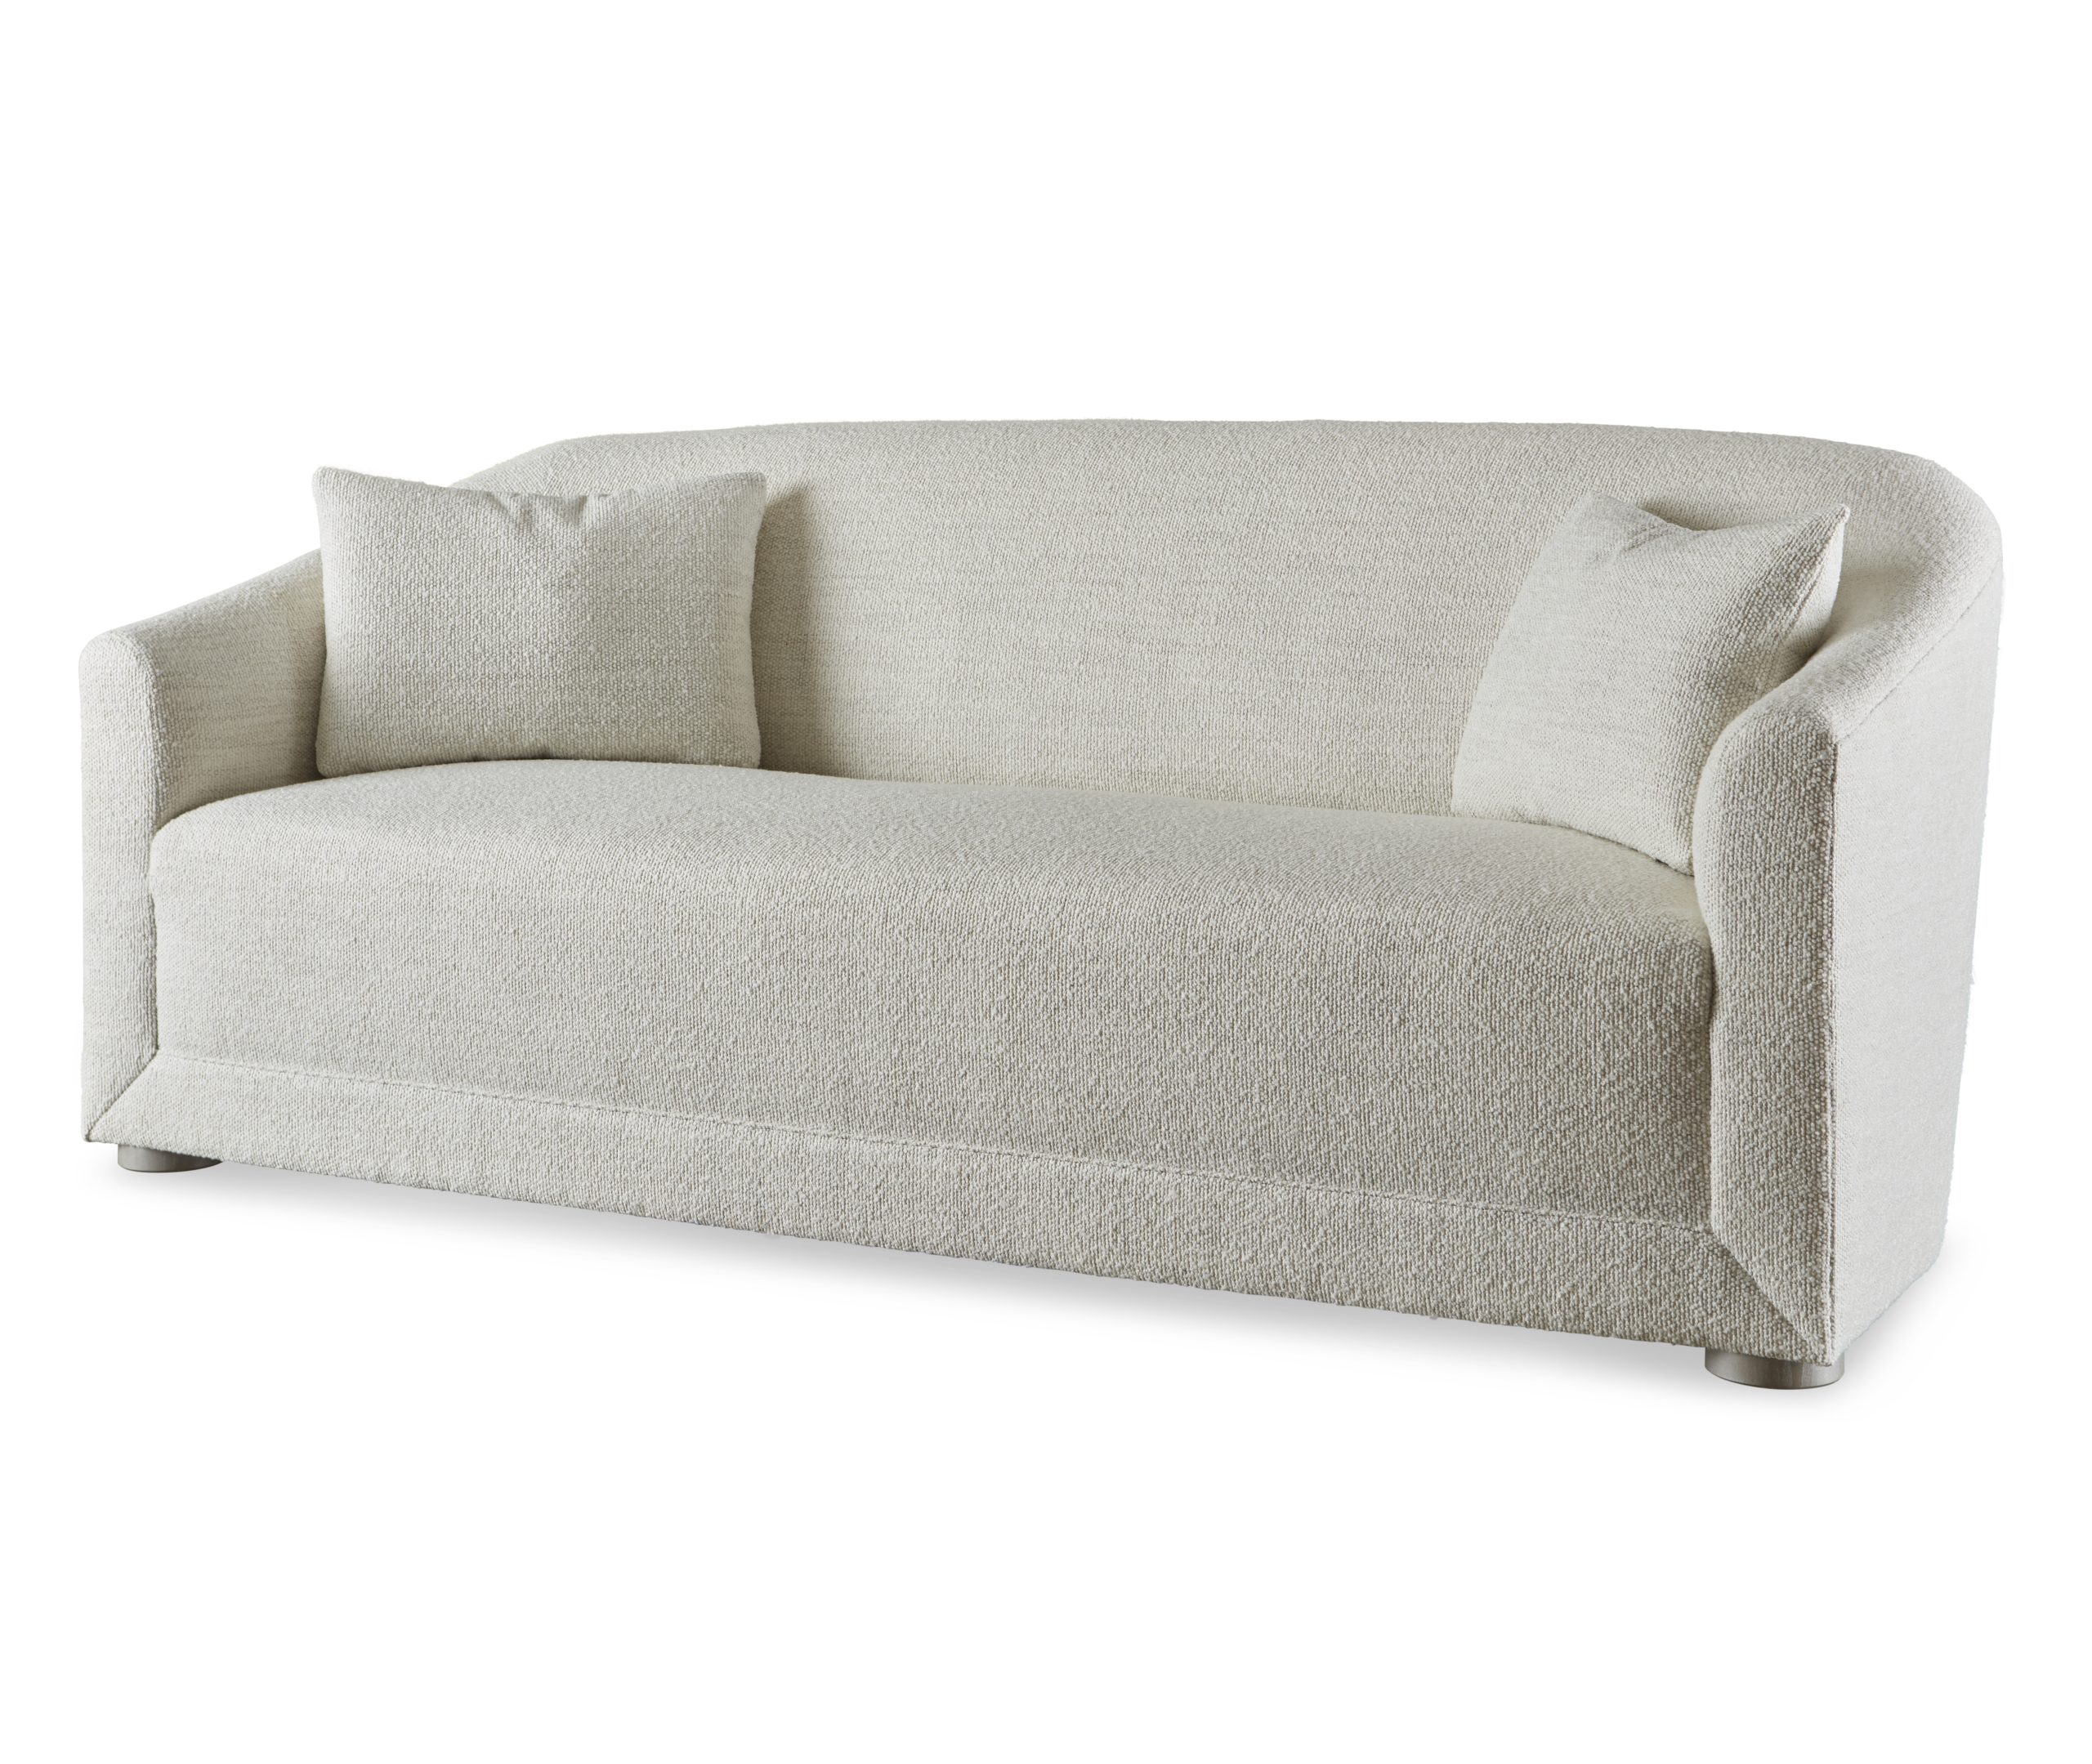 Baker_products_WNWN_anton_loveseat_BAU3106L_FRONT_3QRT-scaled-1